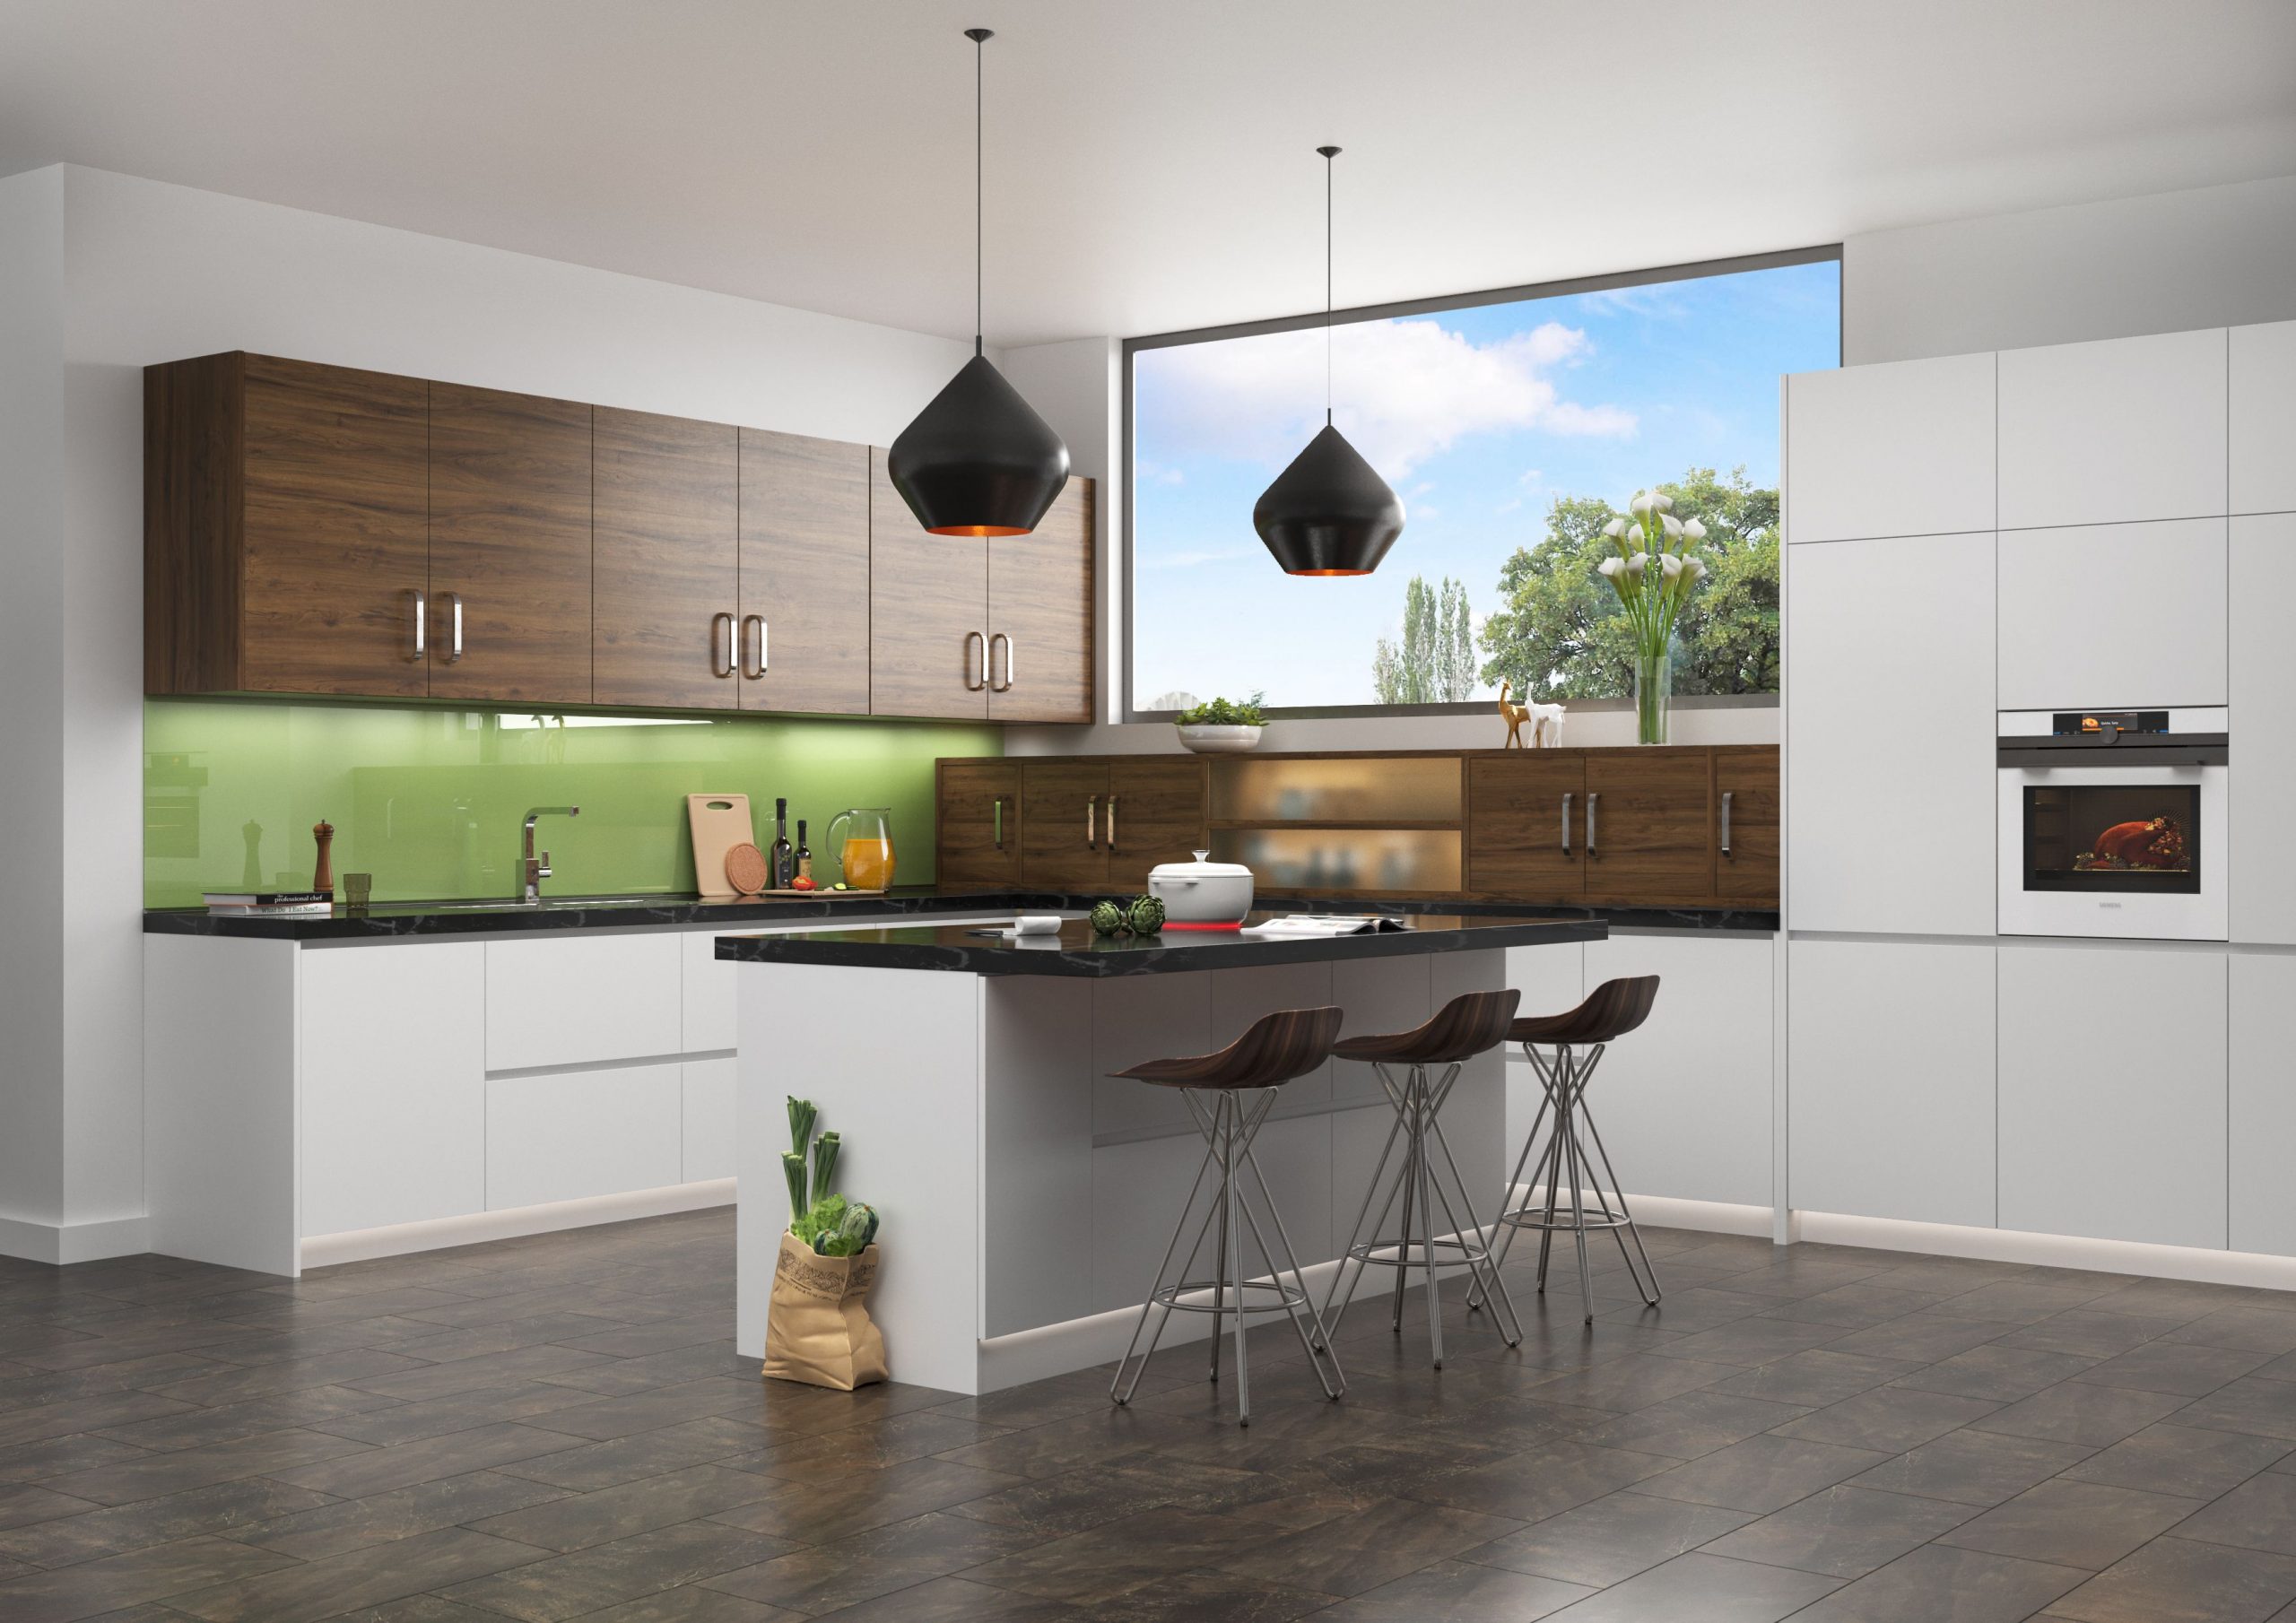 Br24 CGI / 3D: Rendered view of a modern kitchen